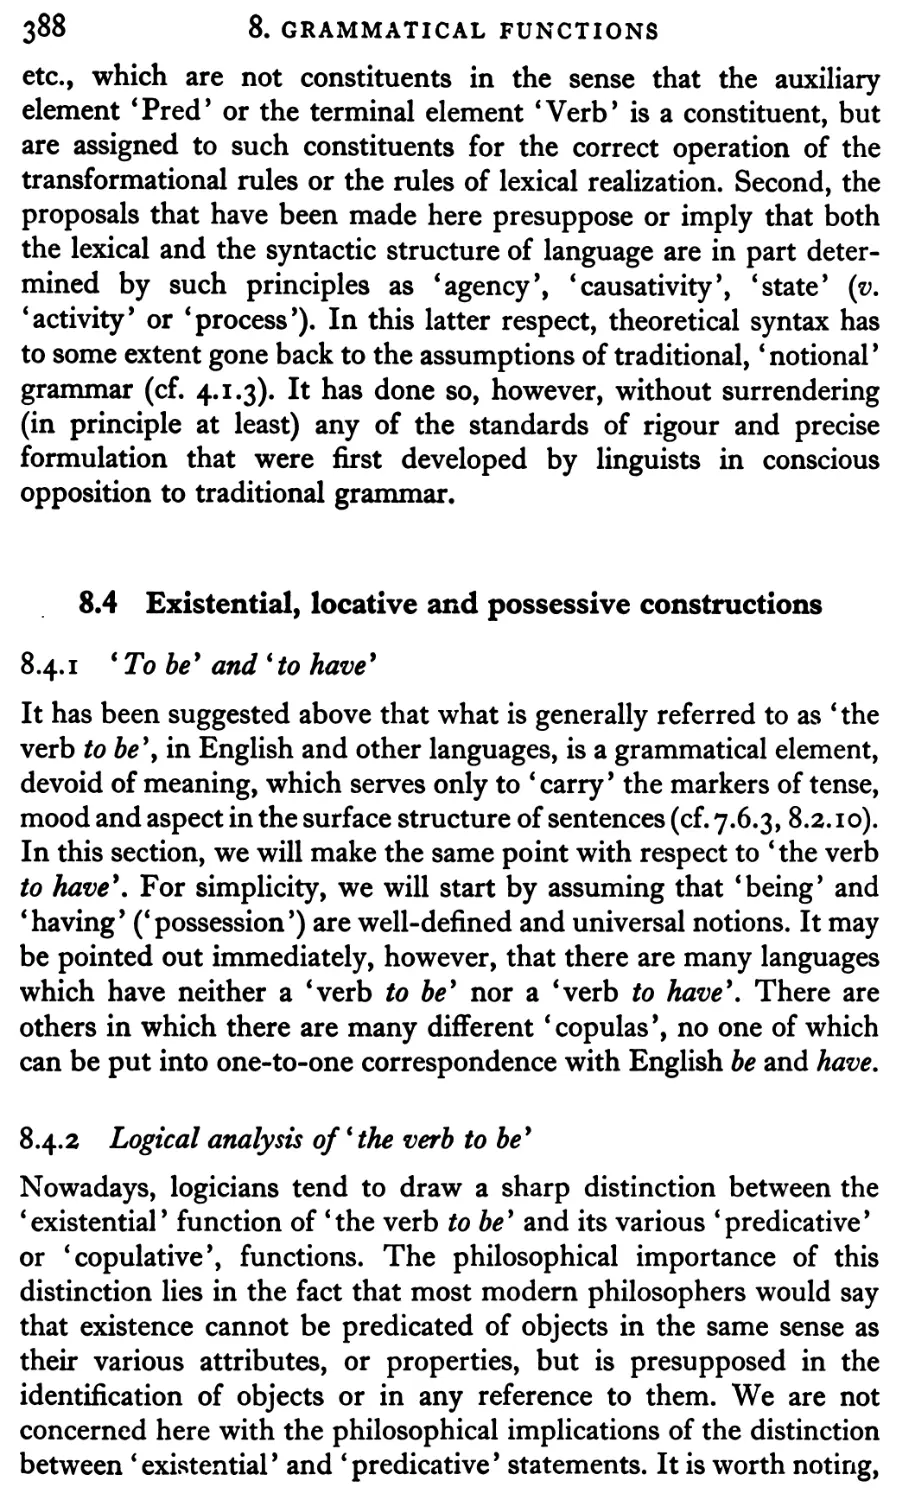 8.4 Existential, locative and possessive constructions